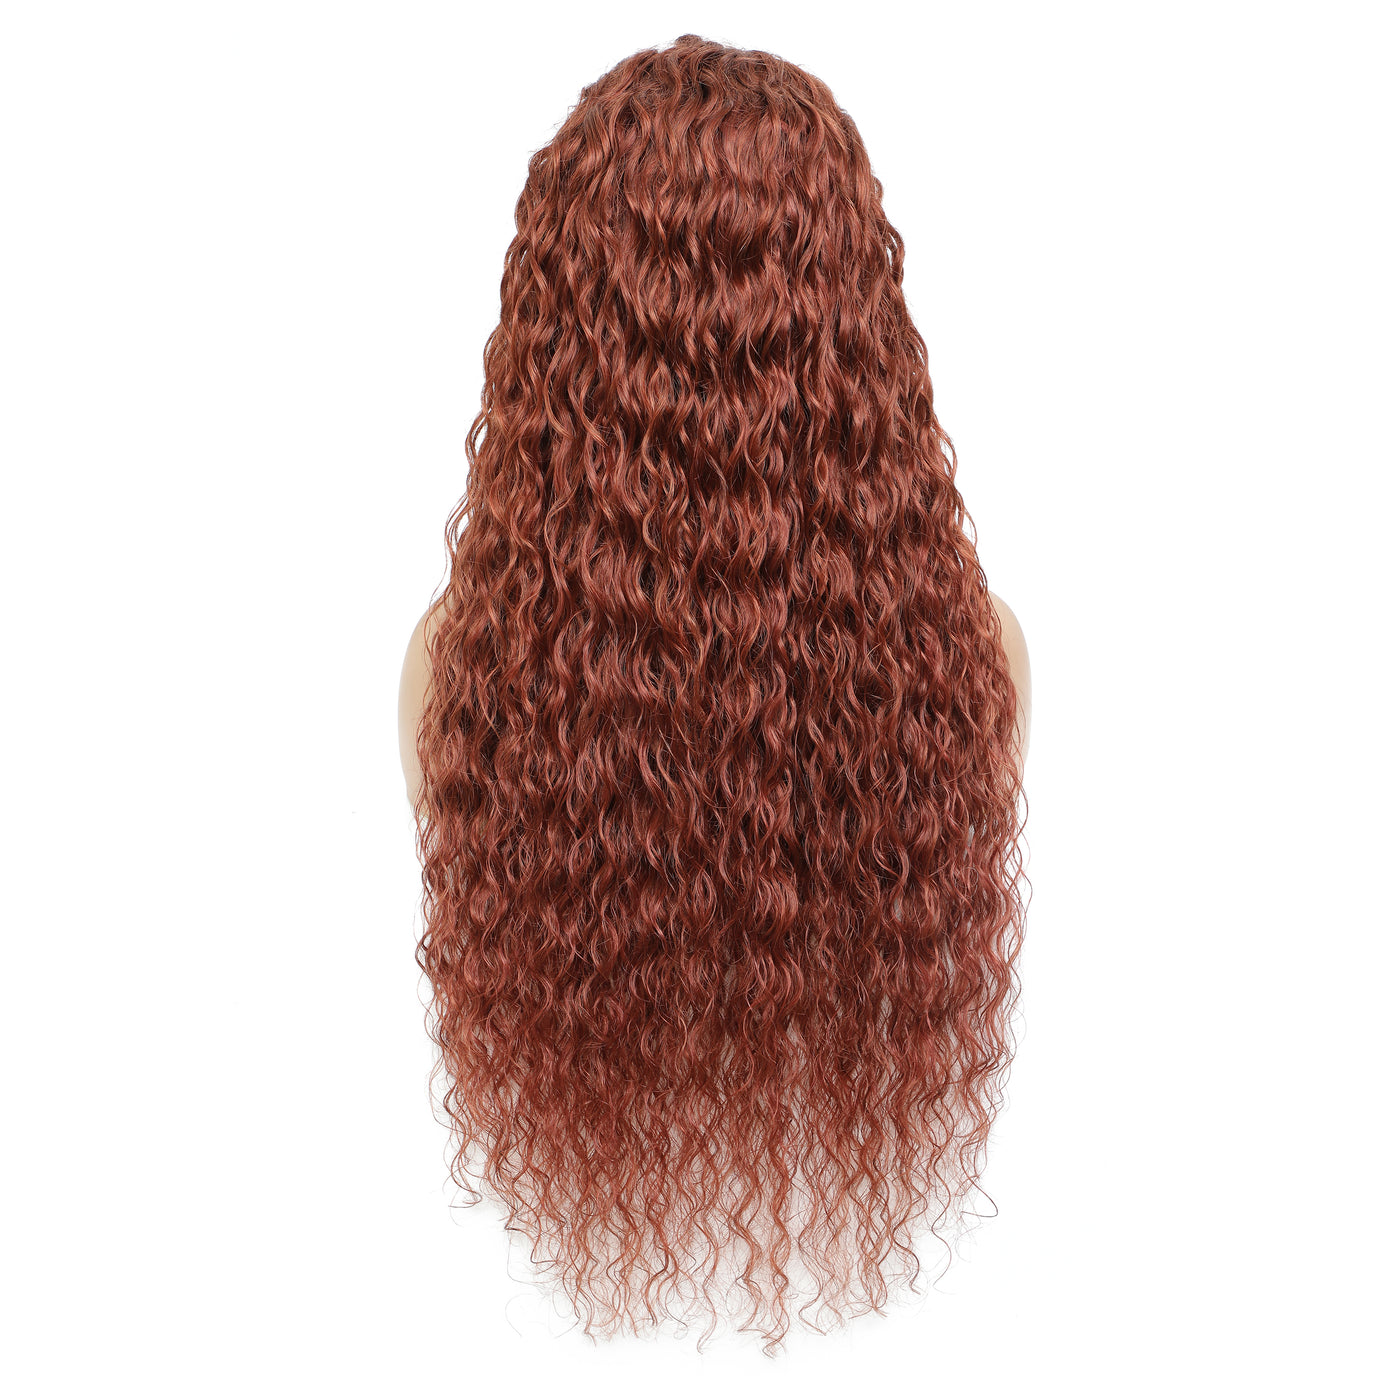 Auburn Cooper Red Water Wave Human Hair 4x4 Lace Closure Wig